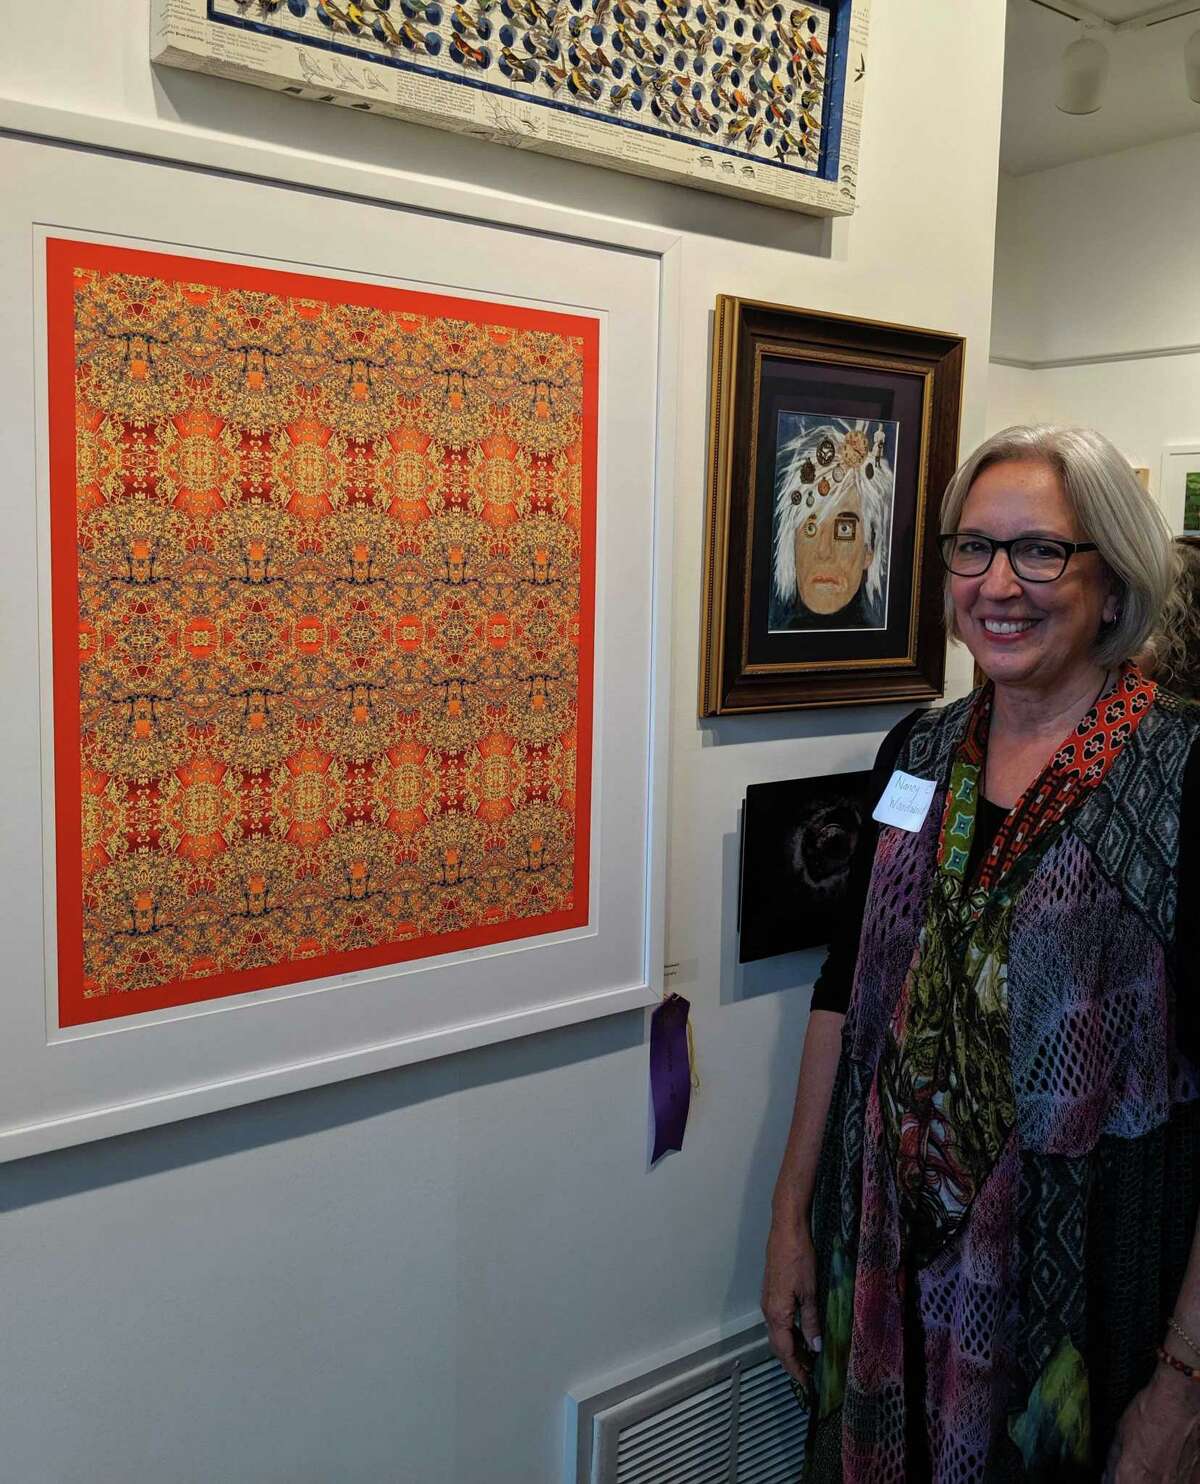 Nancy Woodward won best in show with her digital photograph Wishes at the Rowayton Arts Center on Oct. 13.